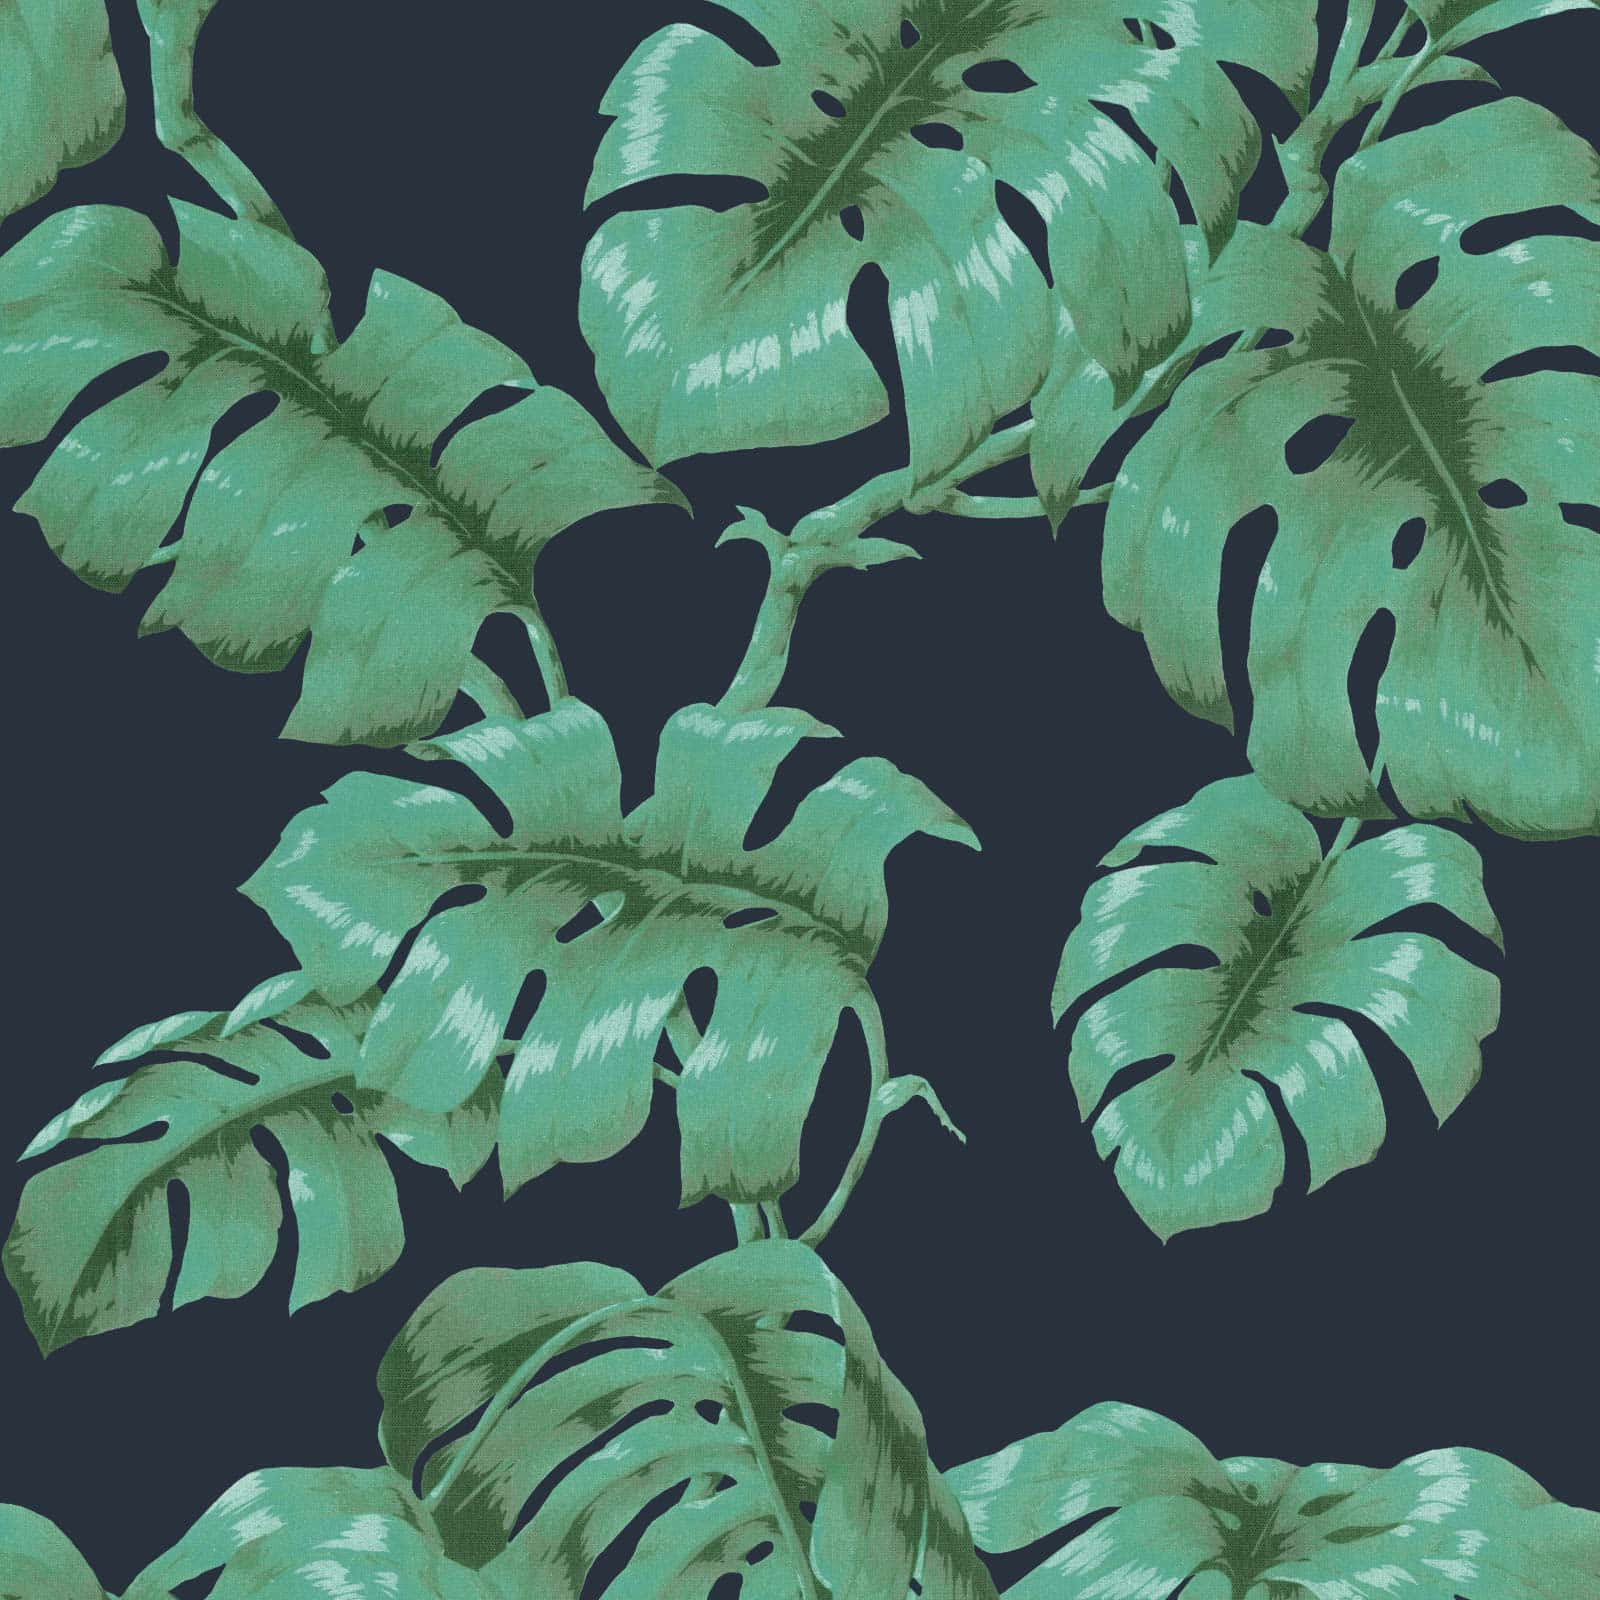 Enjoying Nature - Looking out over the exotic Monstera leaf